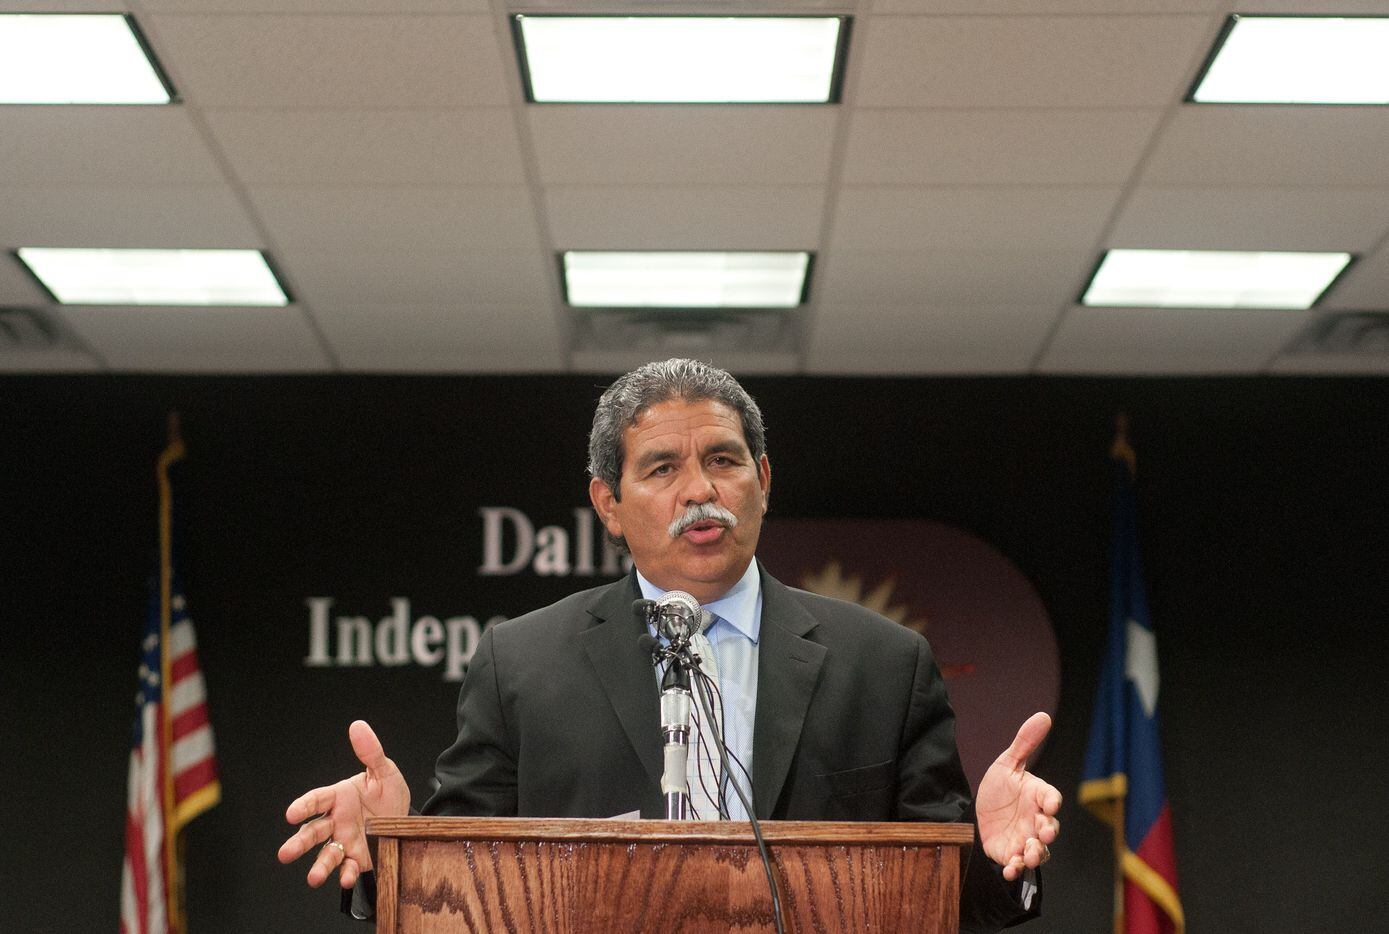 Dallas ISD Superintendent Michael Hinojosa explains his reasons for leaving the district to take a job with Georgia's Cobb County School District during a press conference on May 19, 2011.